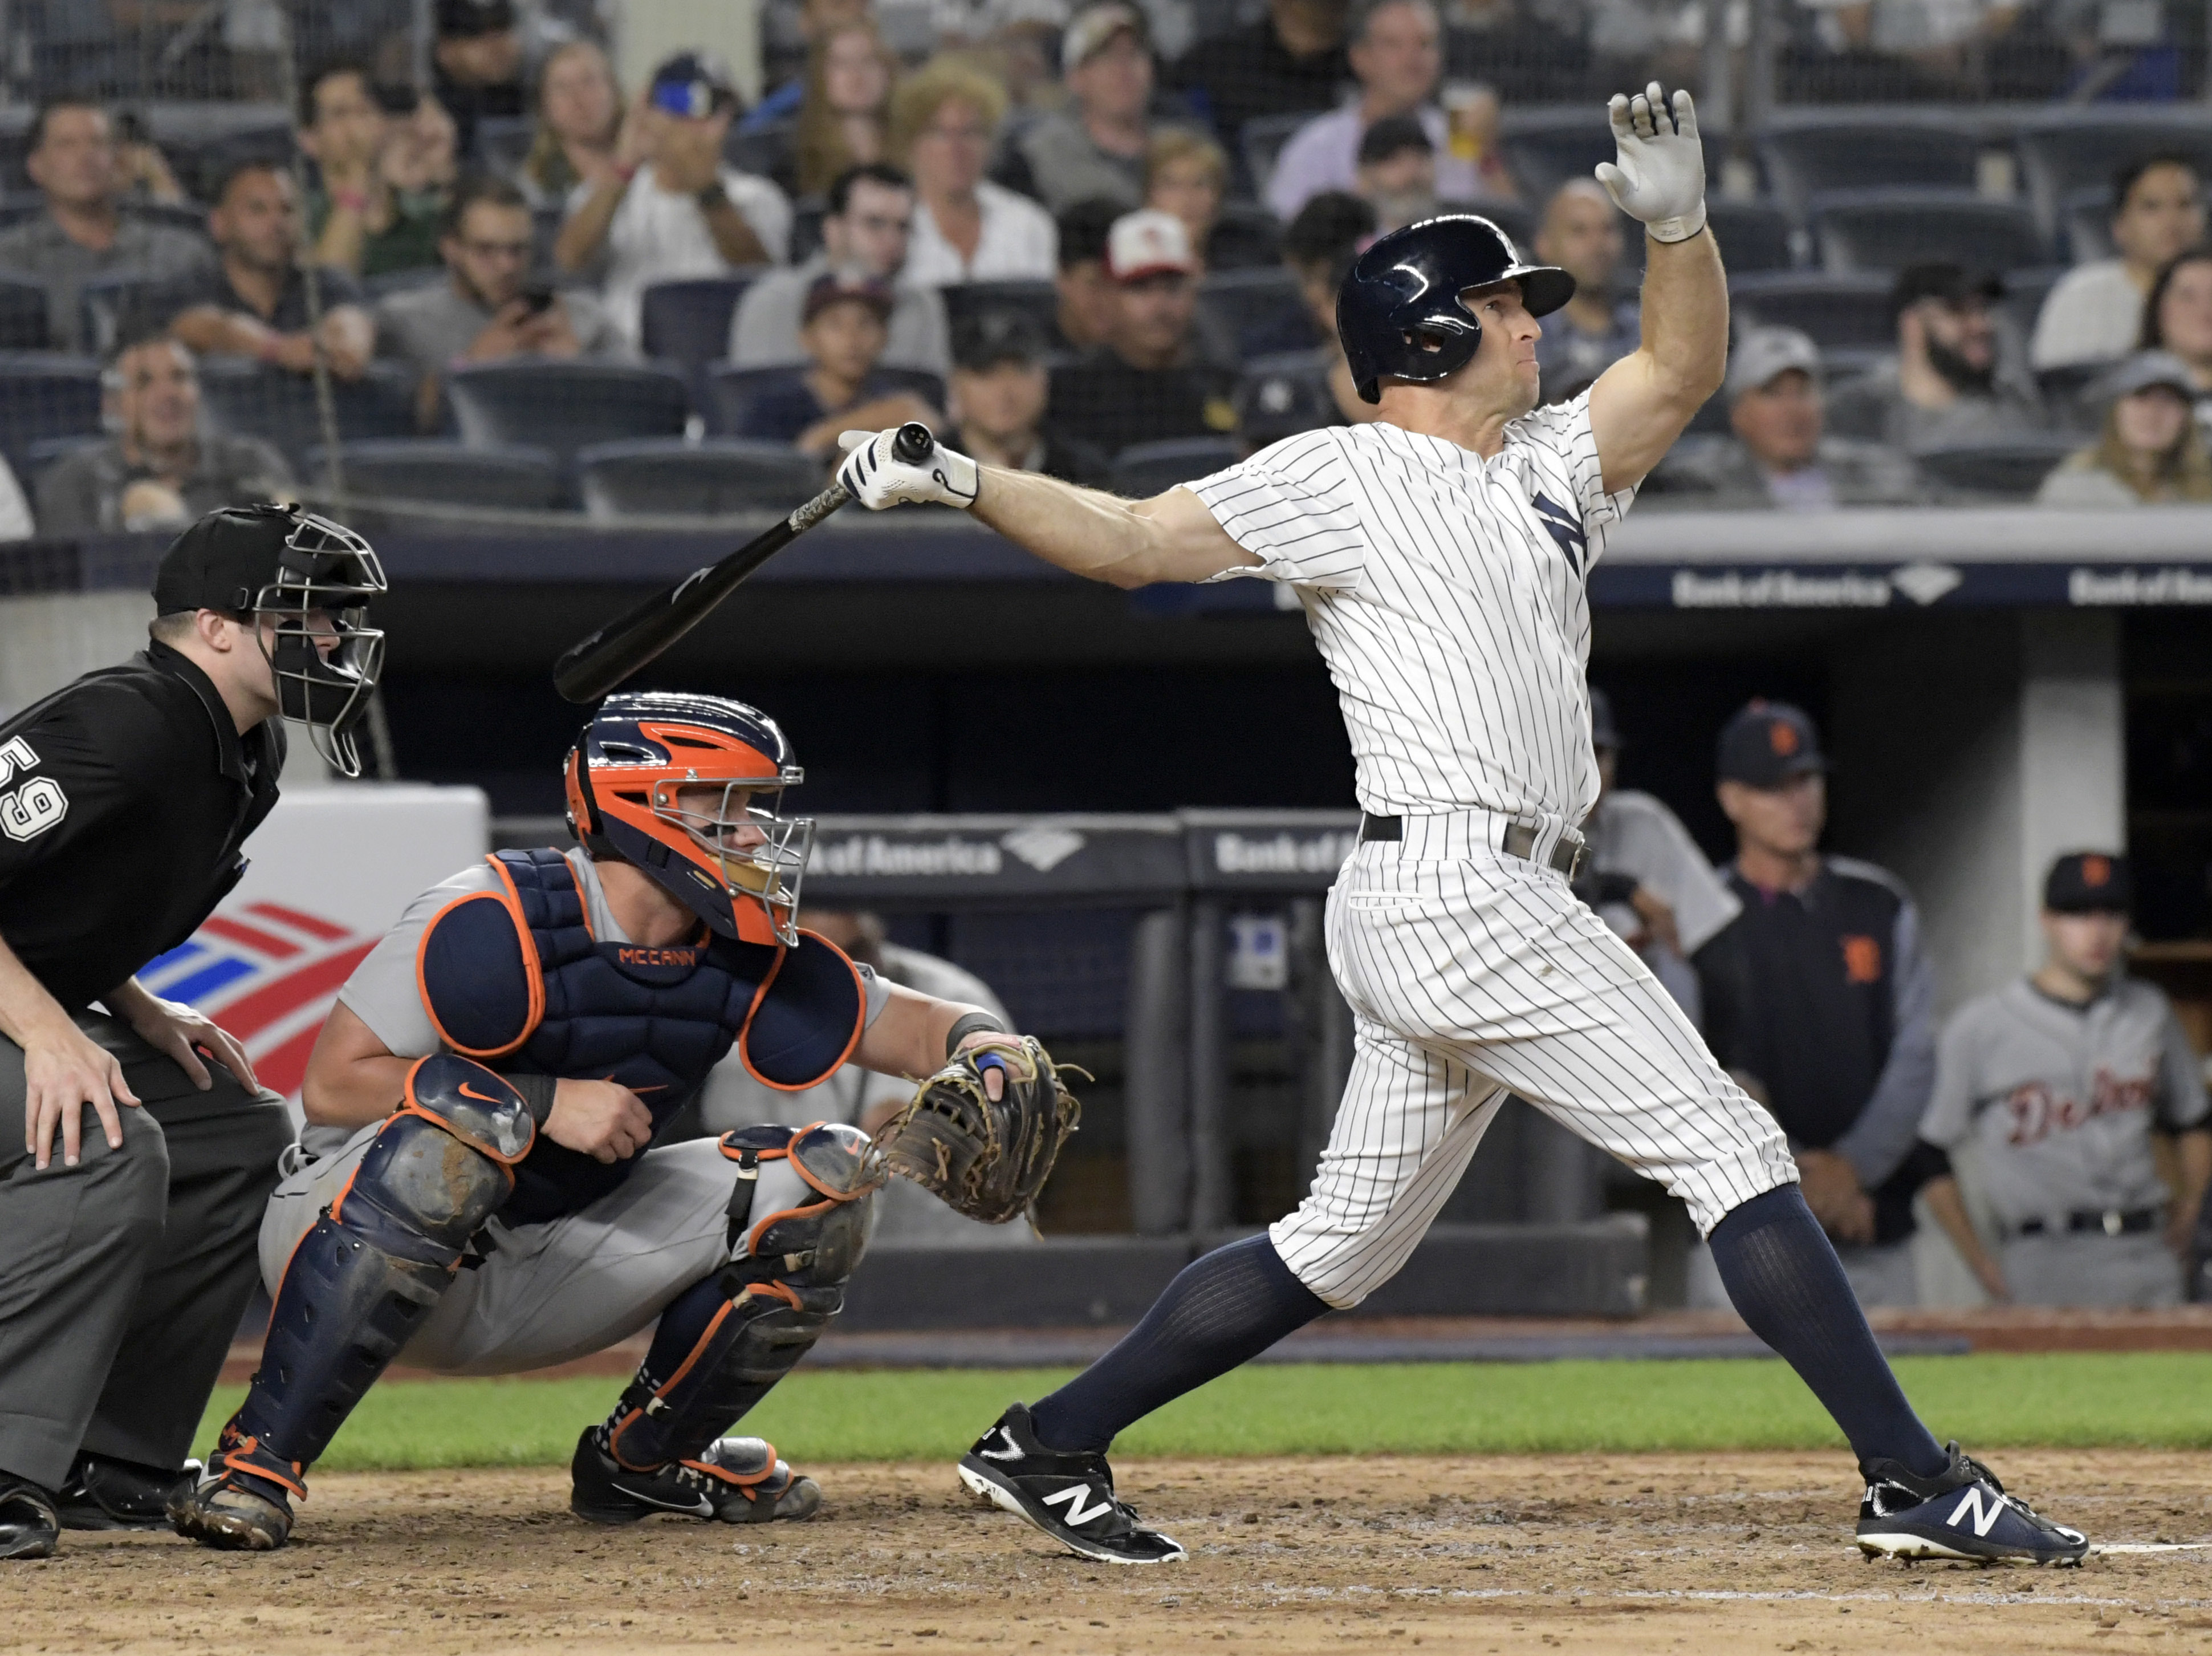 Yankees rally after contested check swing, beat Tigers 7-5